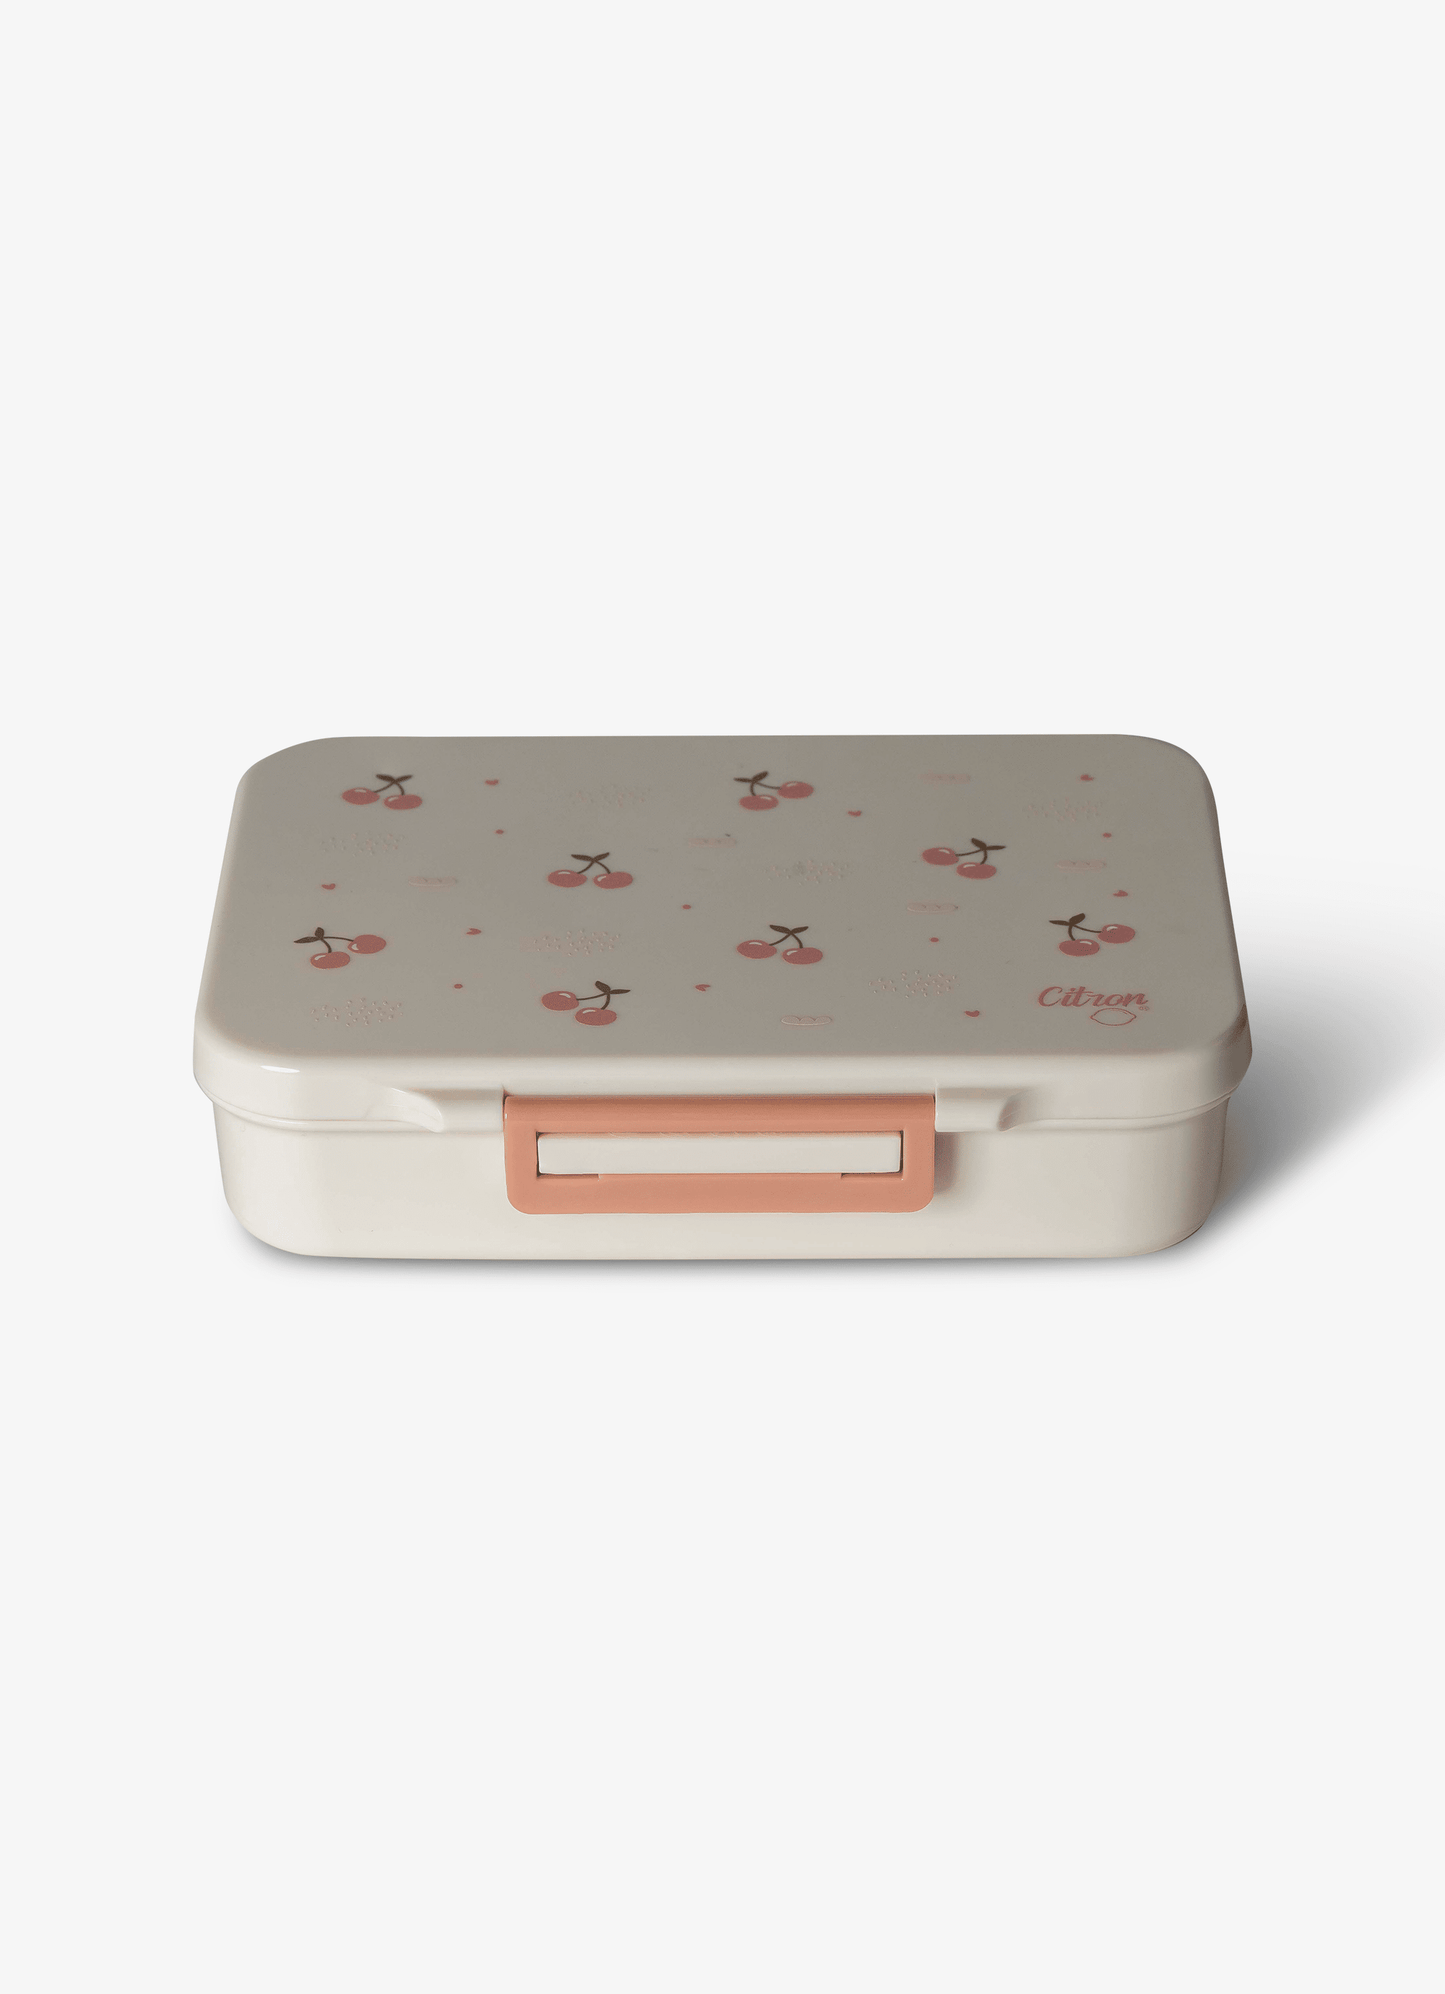 Incredible Tritan Lunch Box - 4 Compartments - Cherry